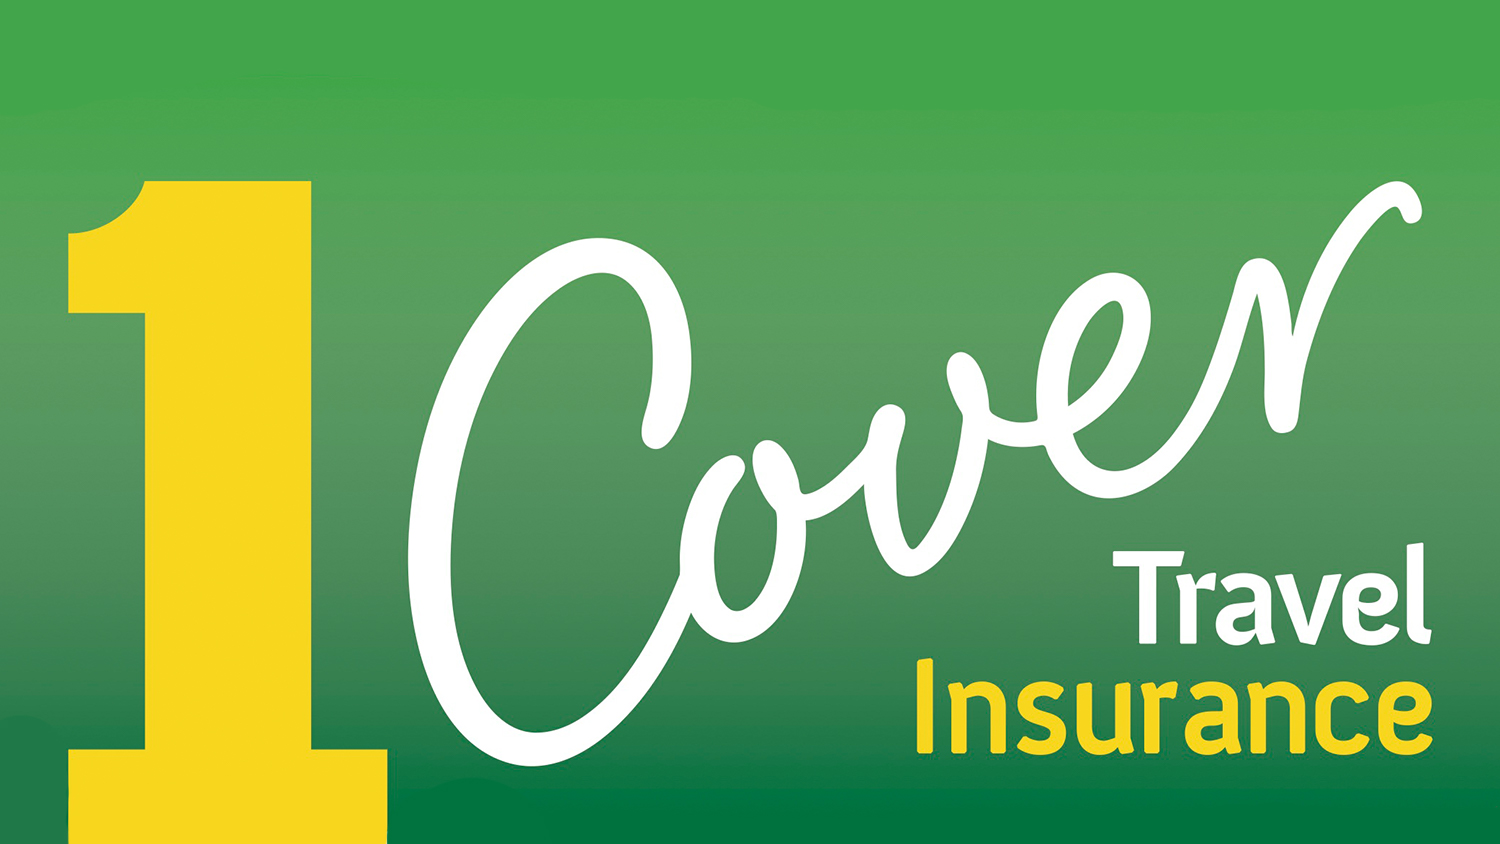 reviews of 1cover travel insurance